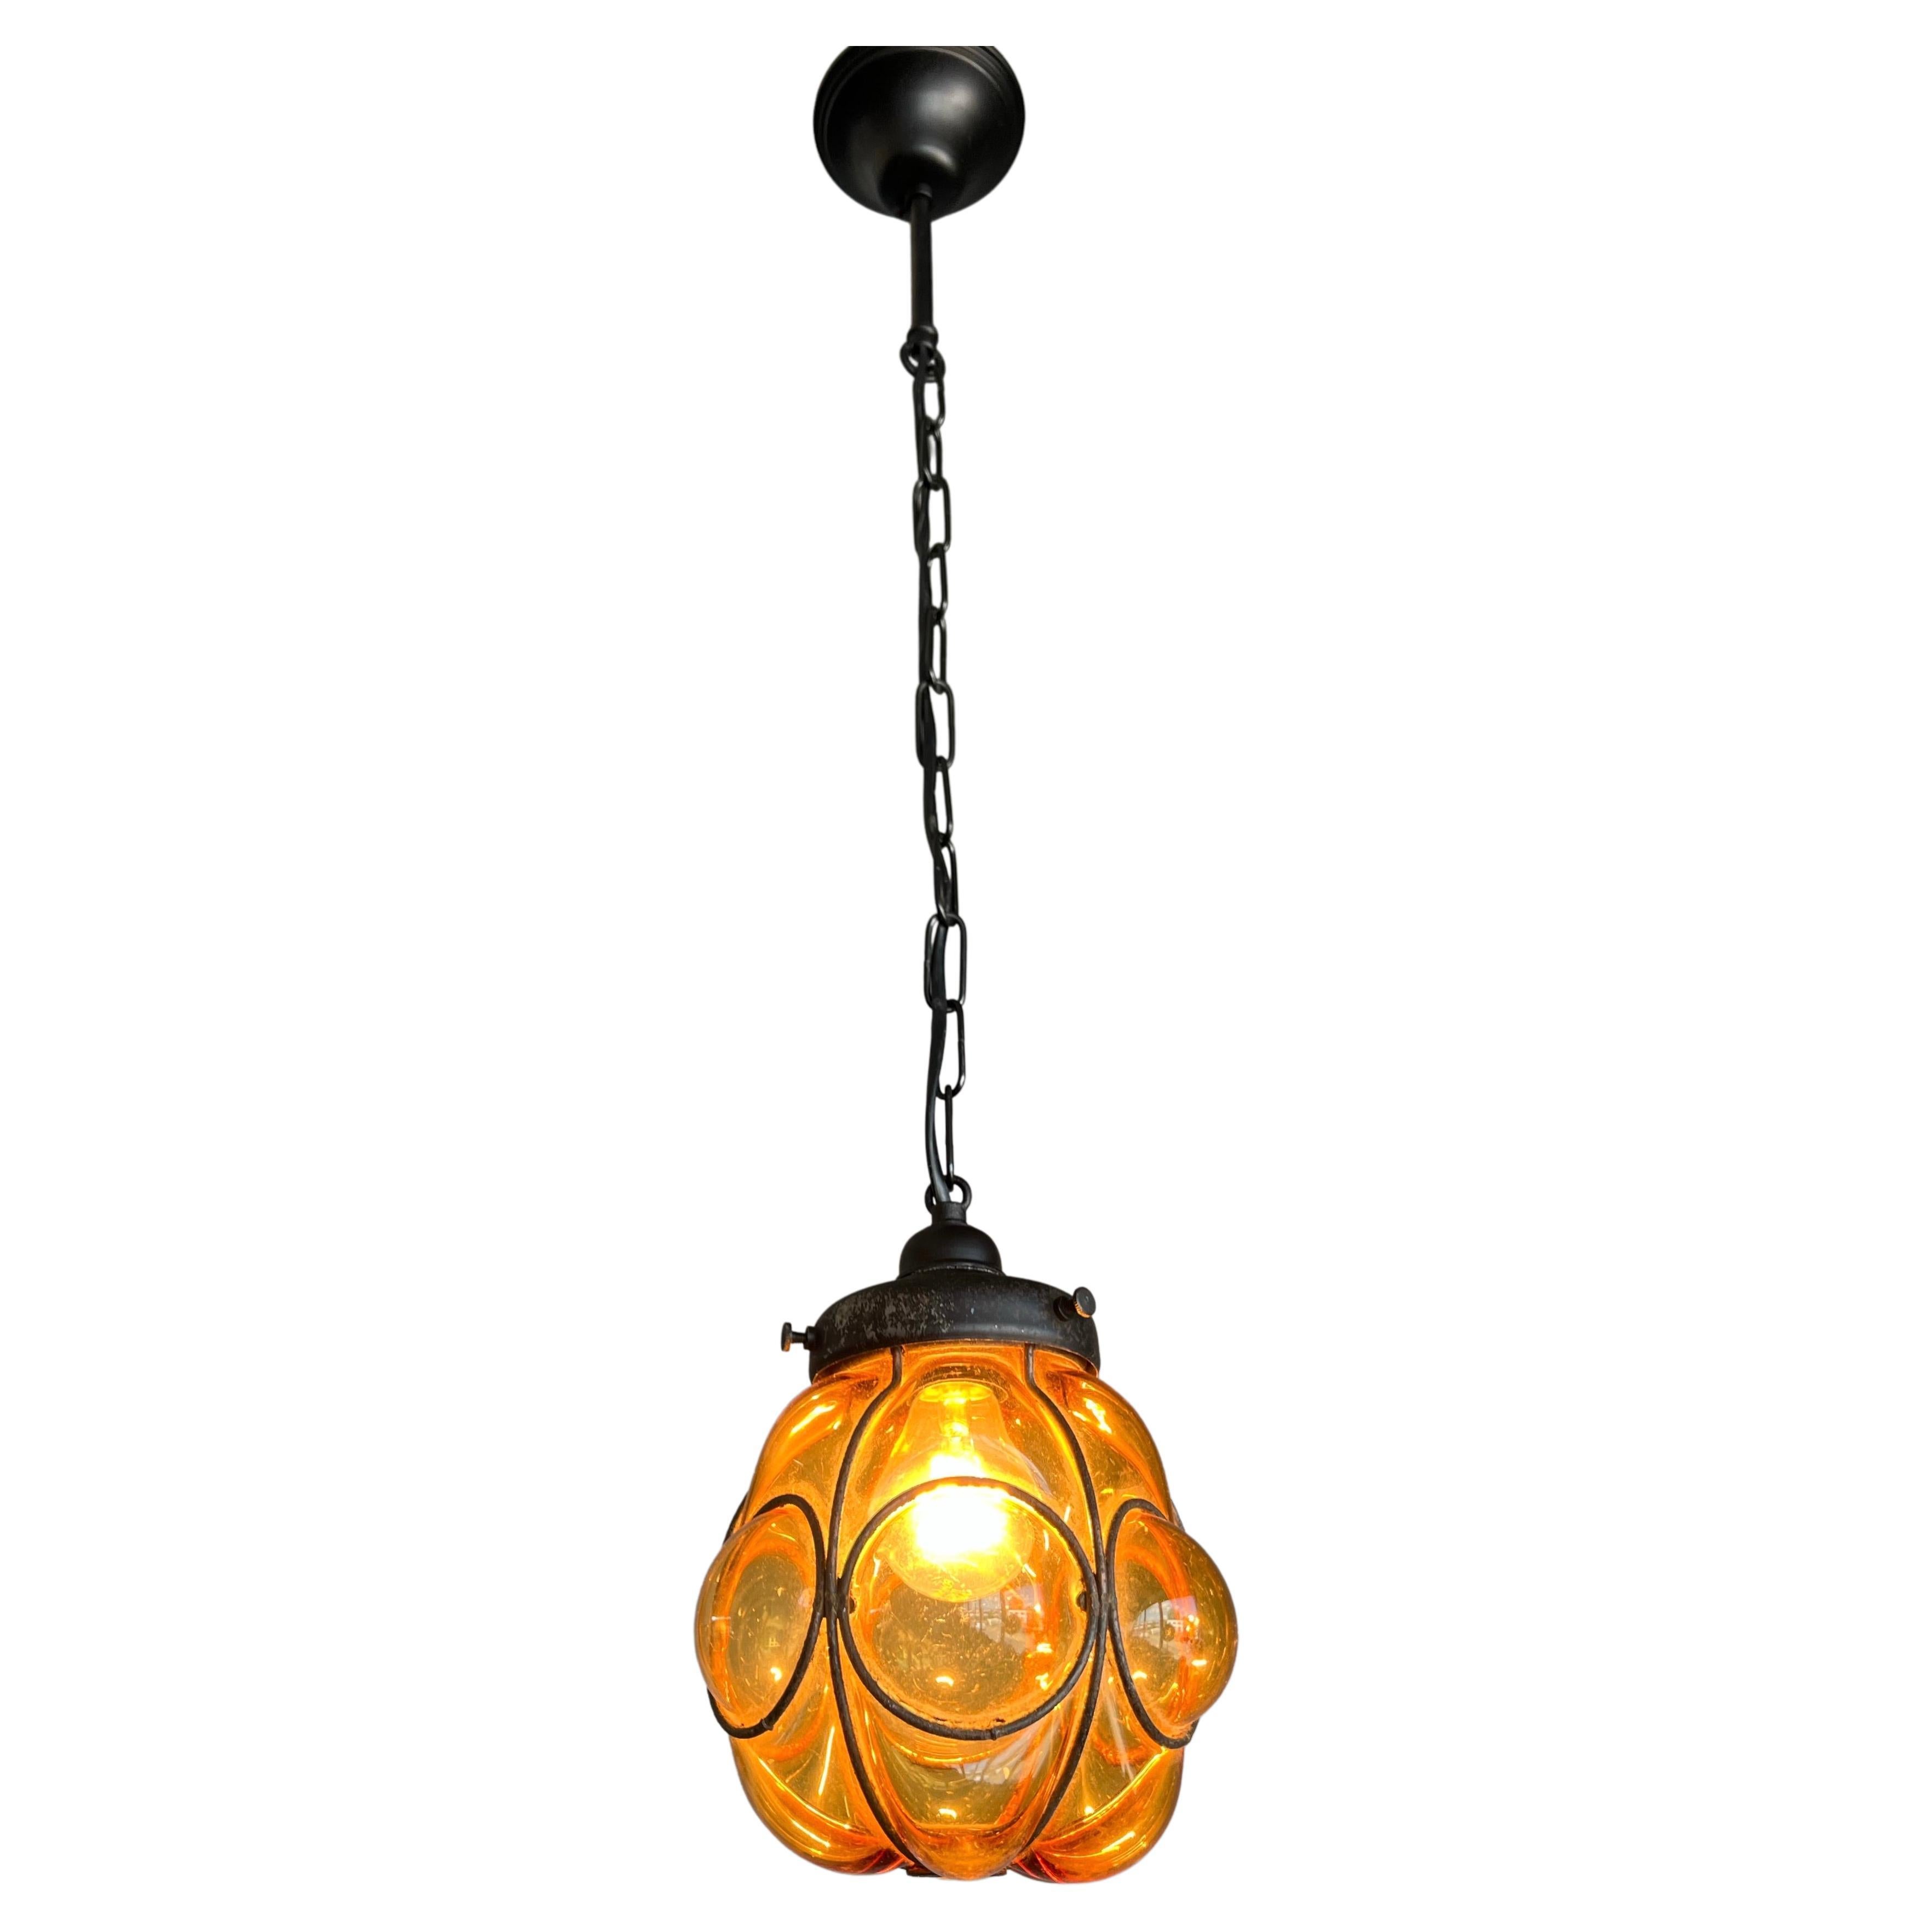 Smallest ever Venetian pendant in a hand forged wrought iron frame.

This adorable and antique Venetian pendant light is the smallest of its kind that we ever had the pleasure of offering. When it comes to condition, style and true workmanship